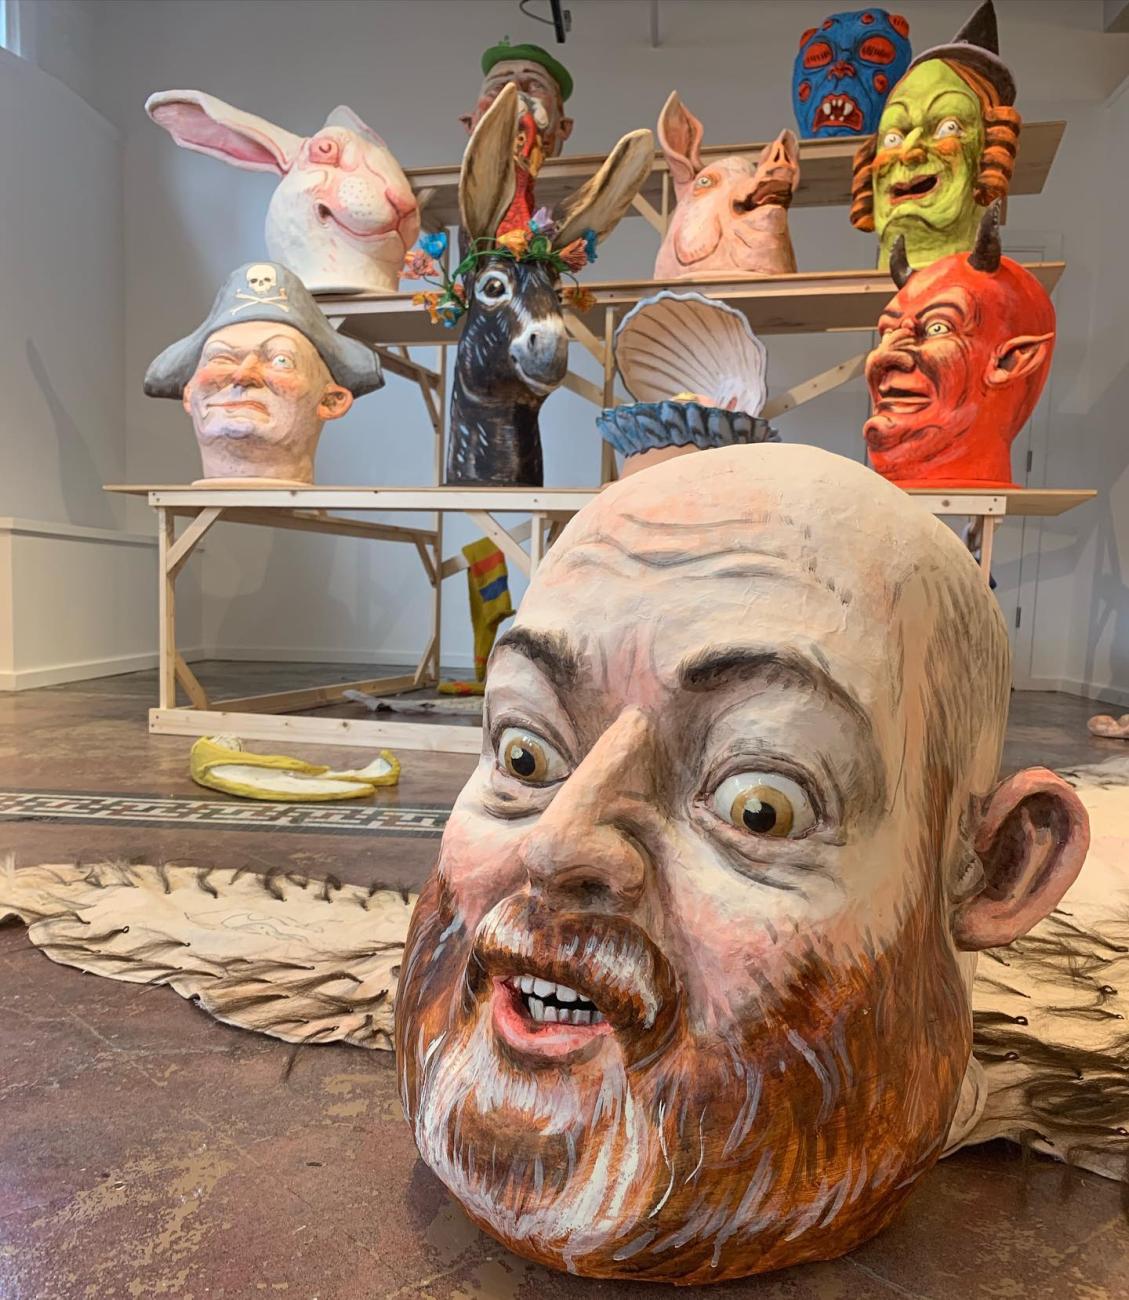 A giant head of Ryan Kelly. Behind are carnivalesque caricatures of animals, demons, witches